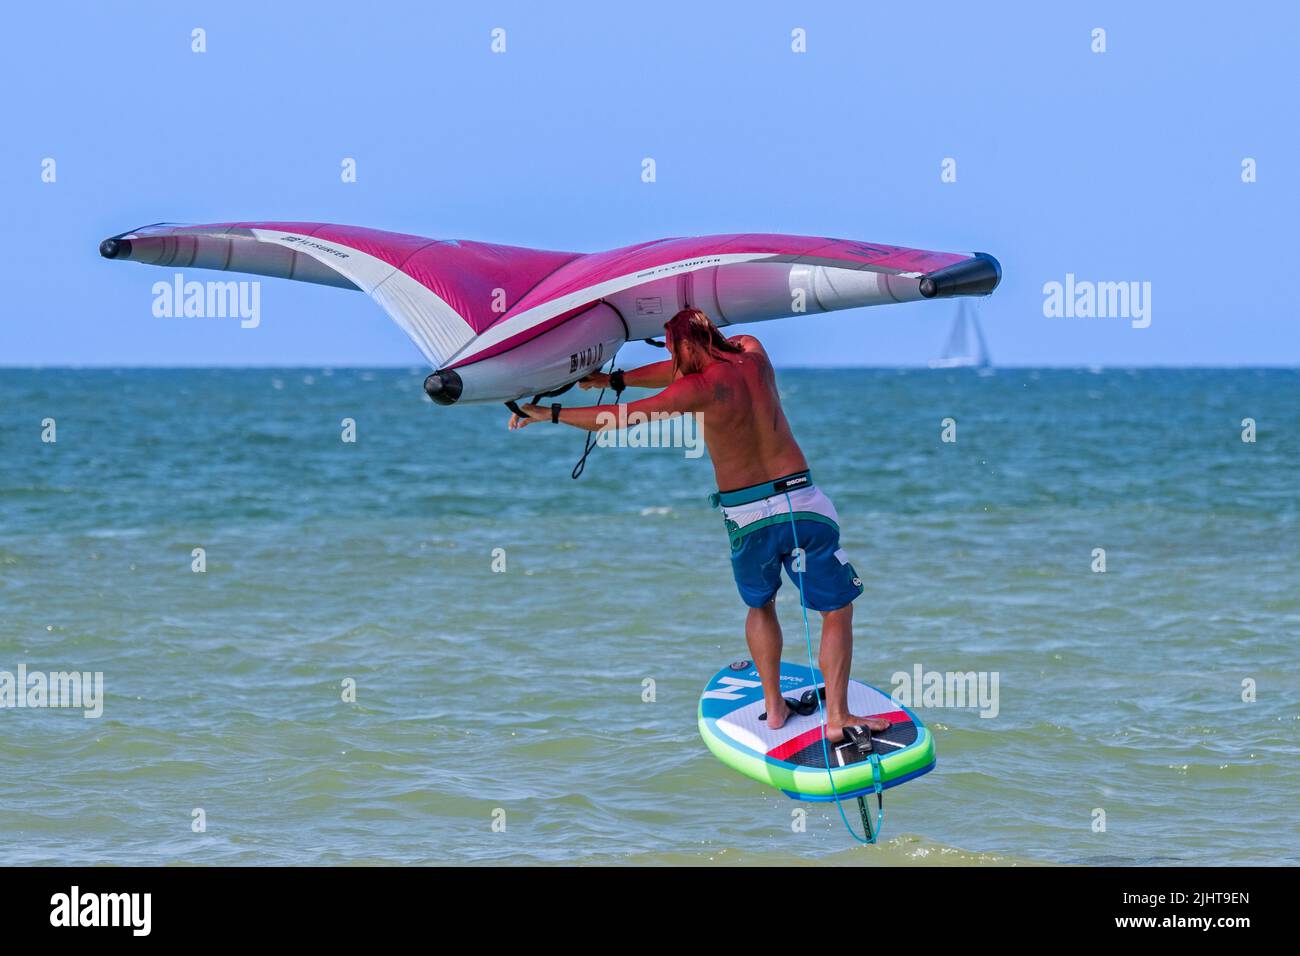 Wing foiling / wing surfing on the North Sea showing wingboarder / wing boarder standing on foilboard / hydrofoil board and holding an inflatable wing Stock Photo